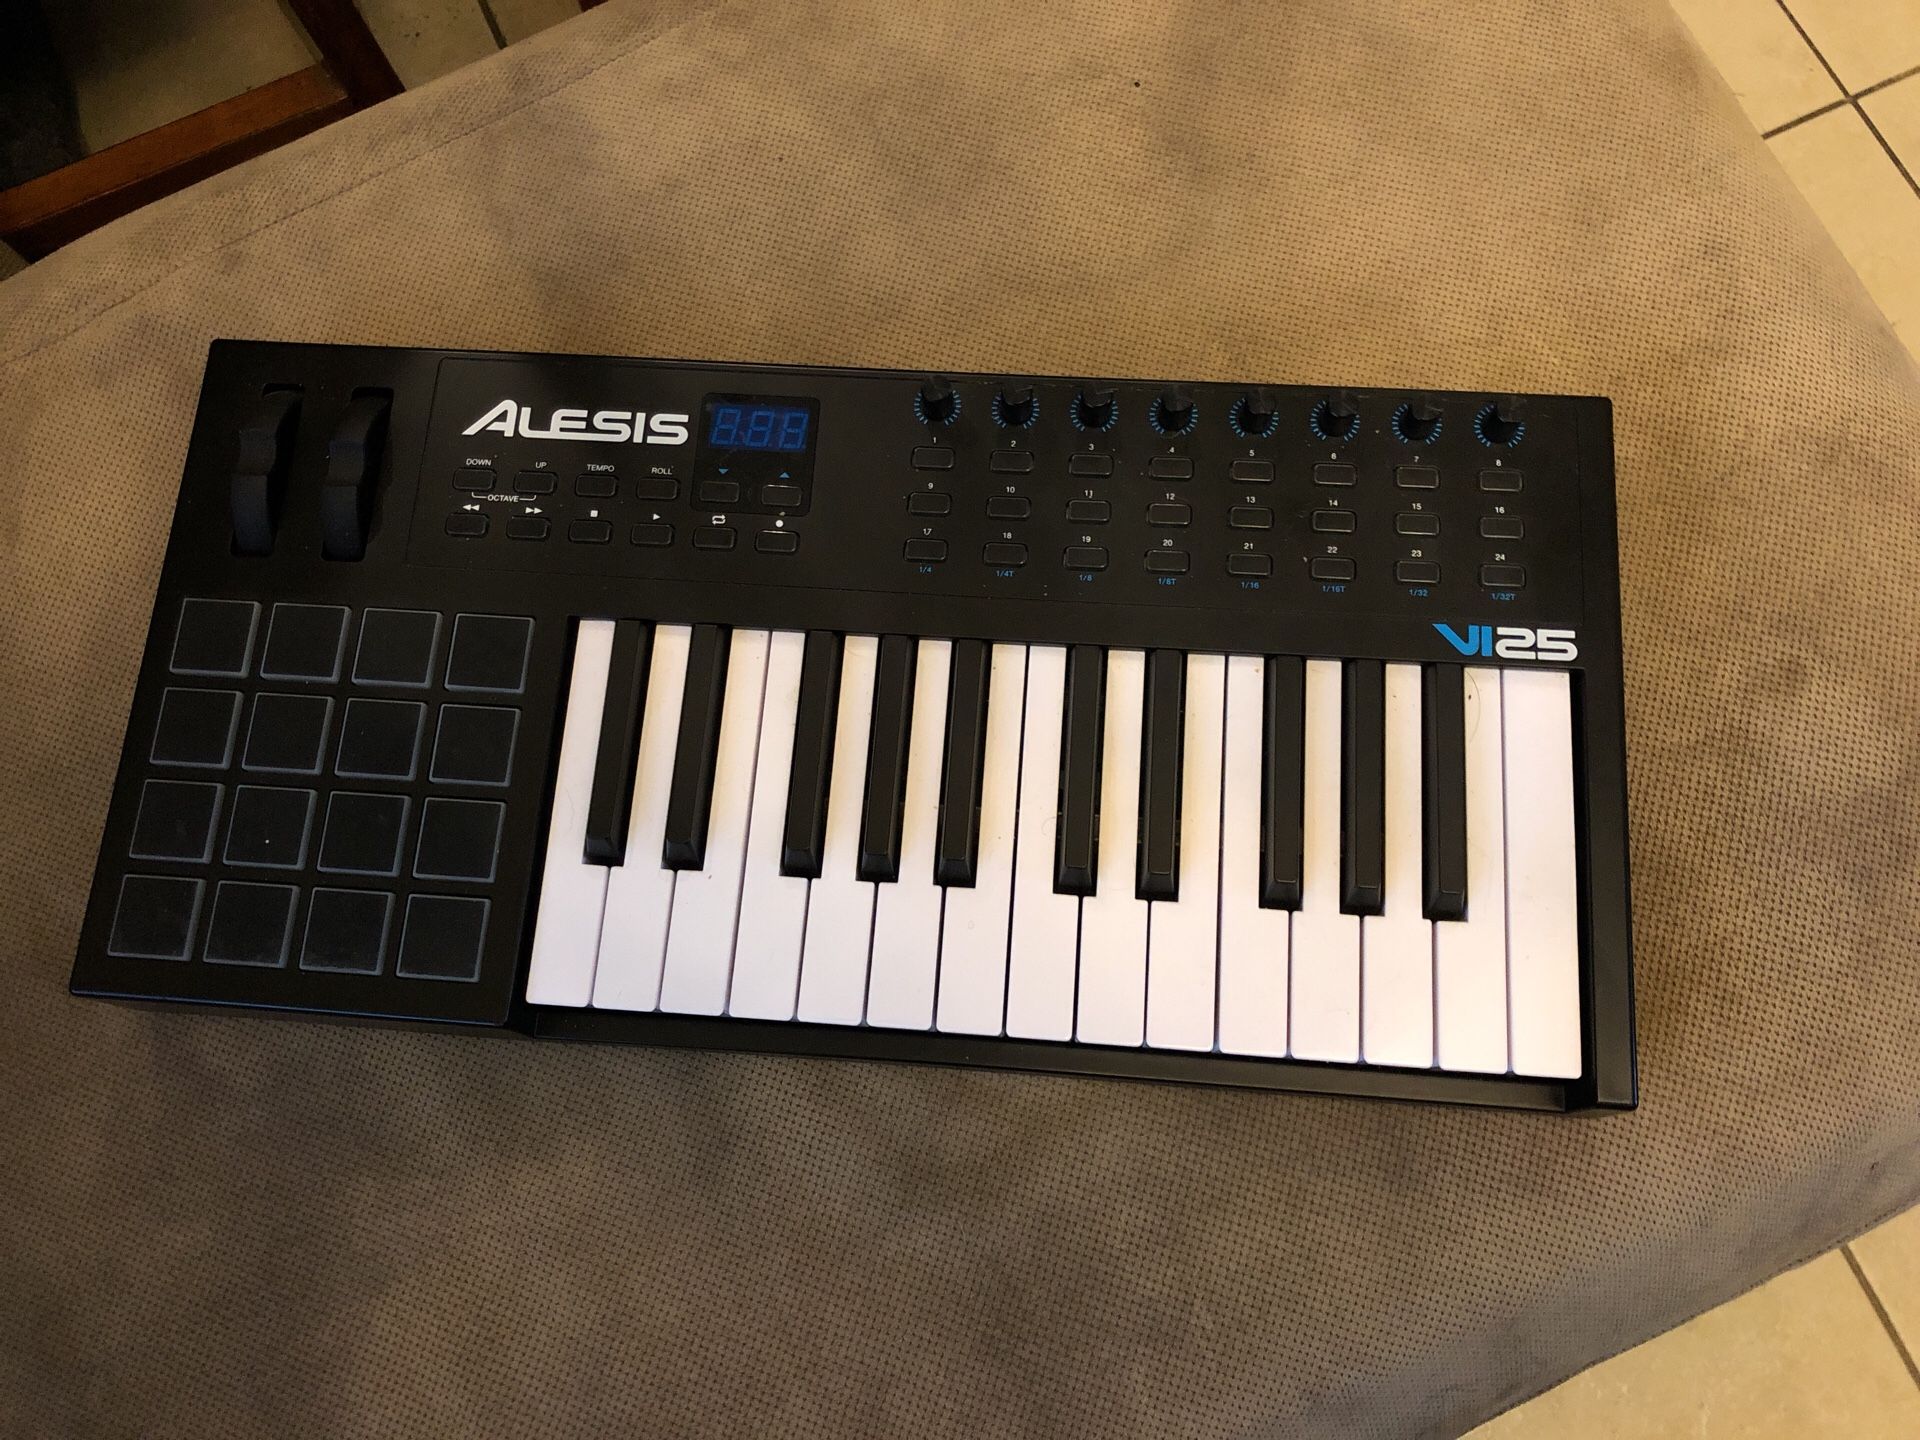 Alesis VI25 key keyboard for music production & Live shows.